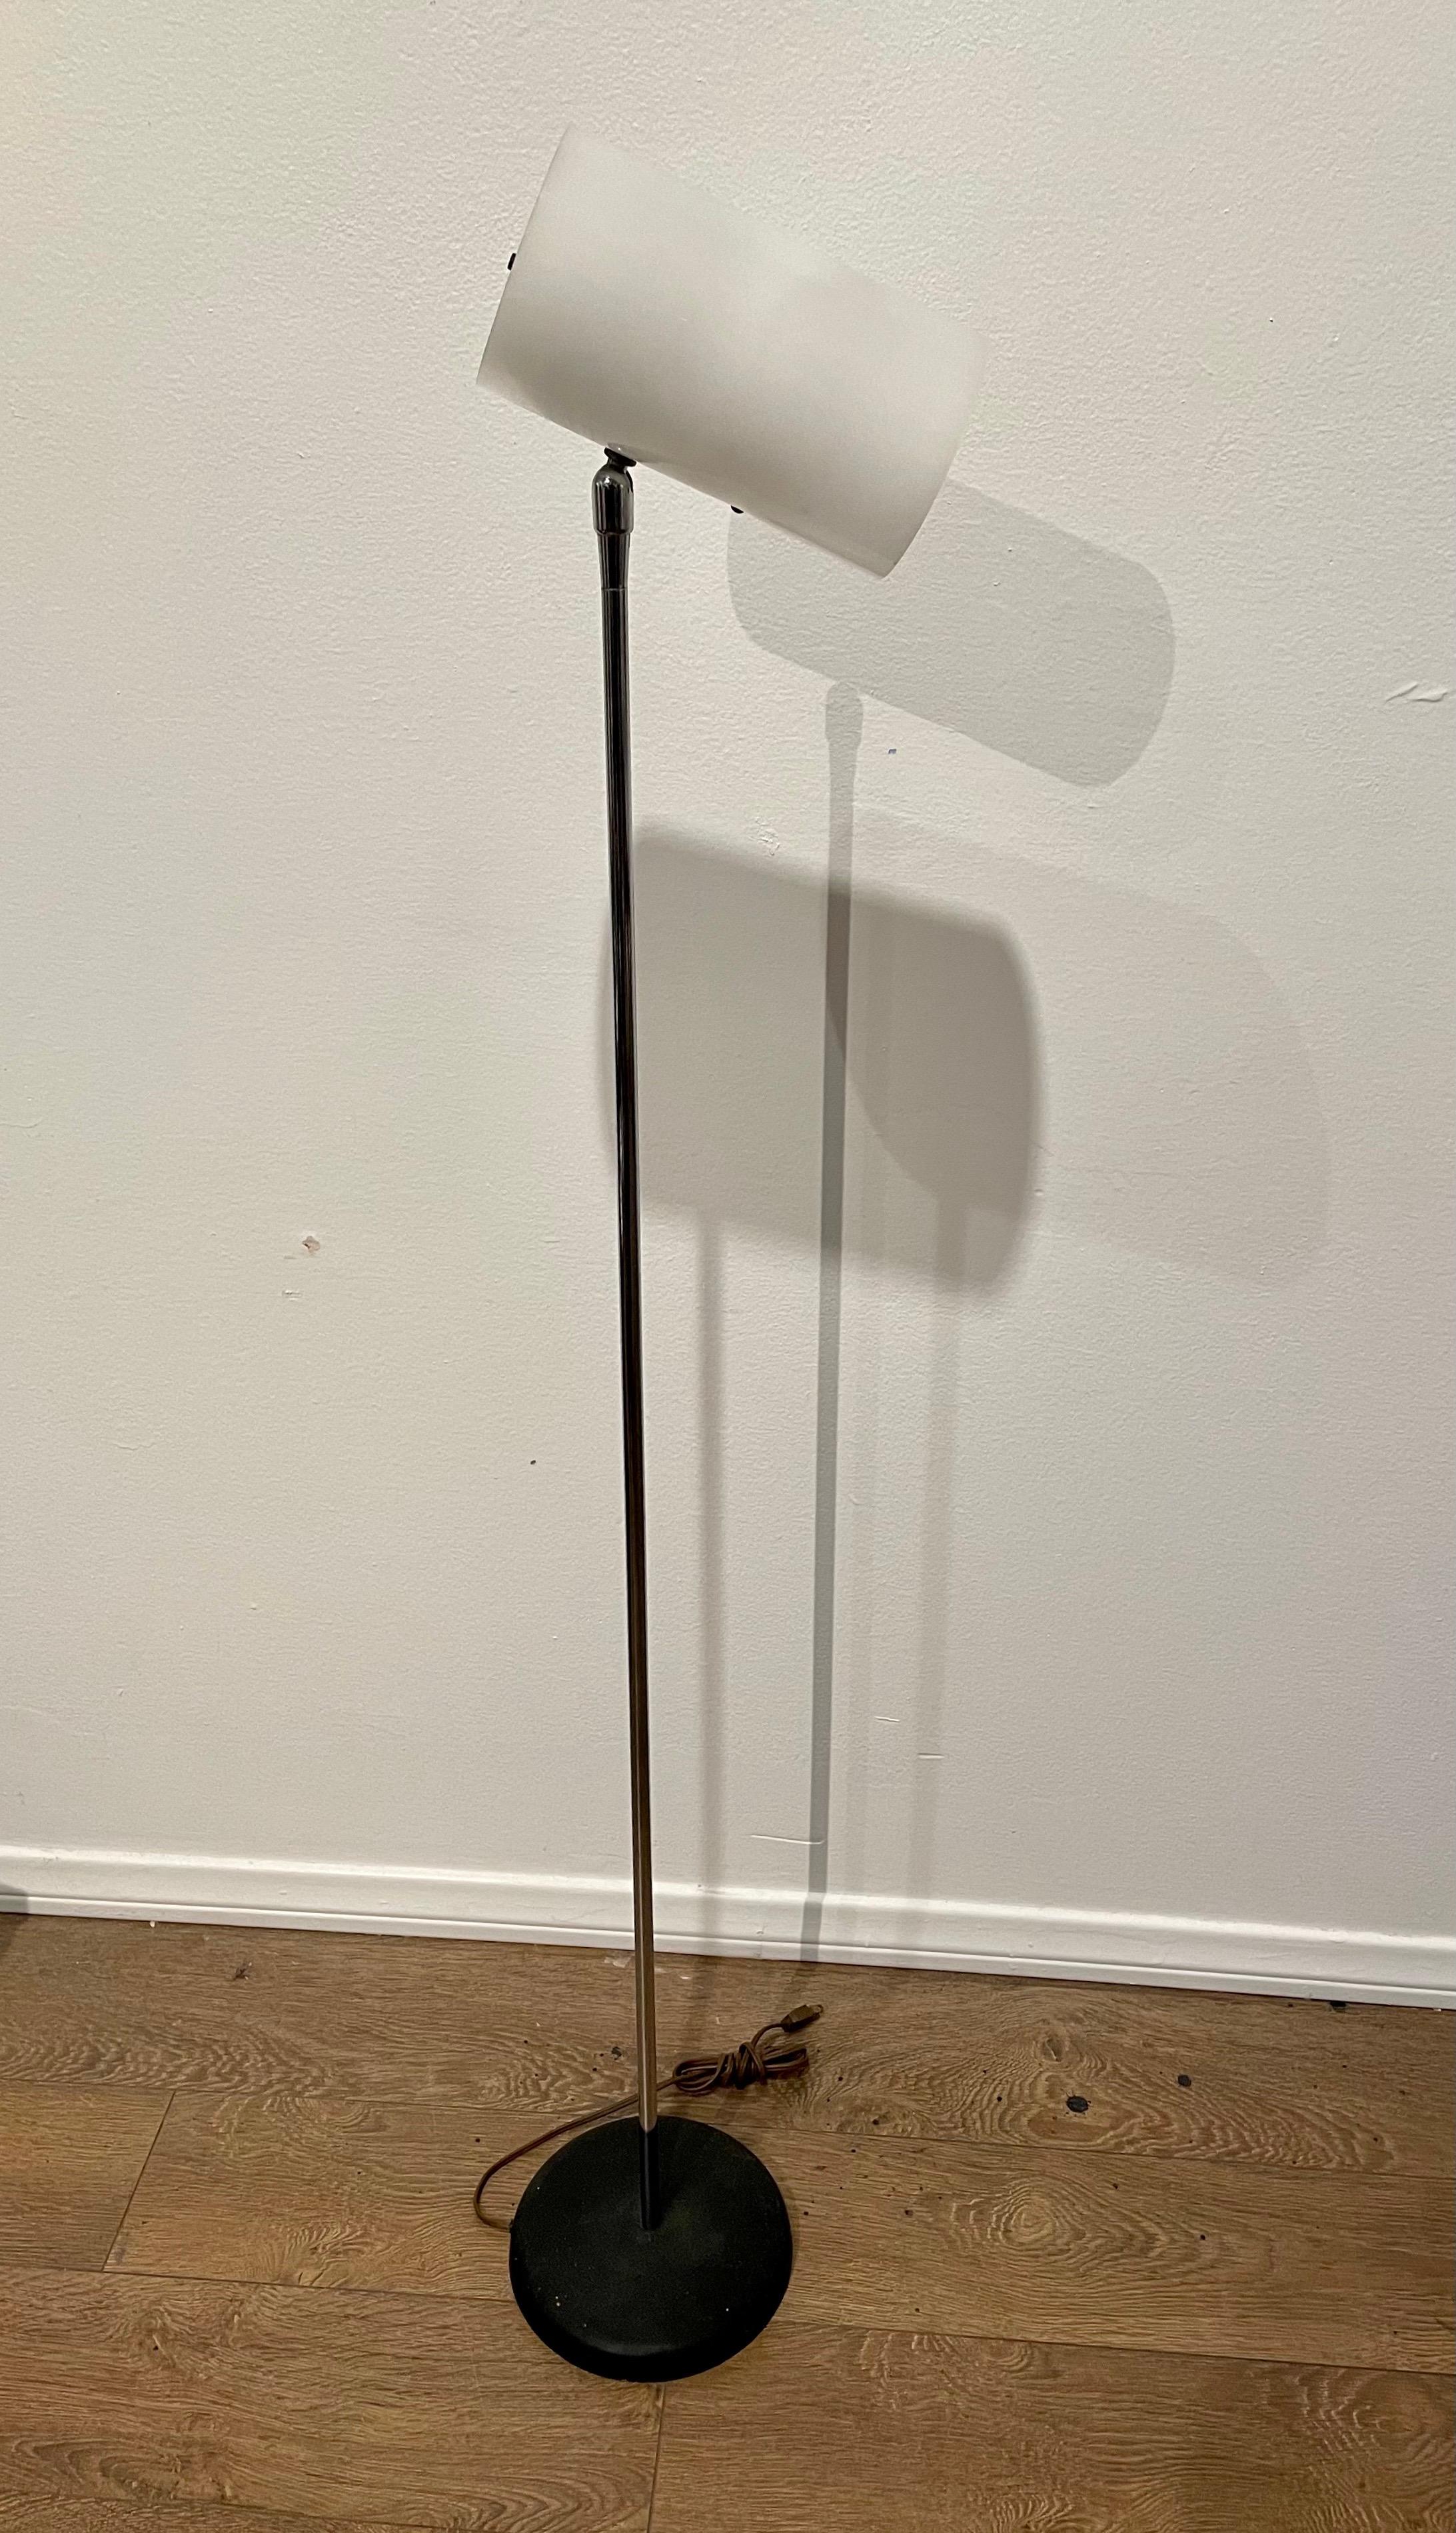 Space Age 1970's Spot Floor Lamp by Lightolier with Movable Head